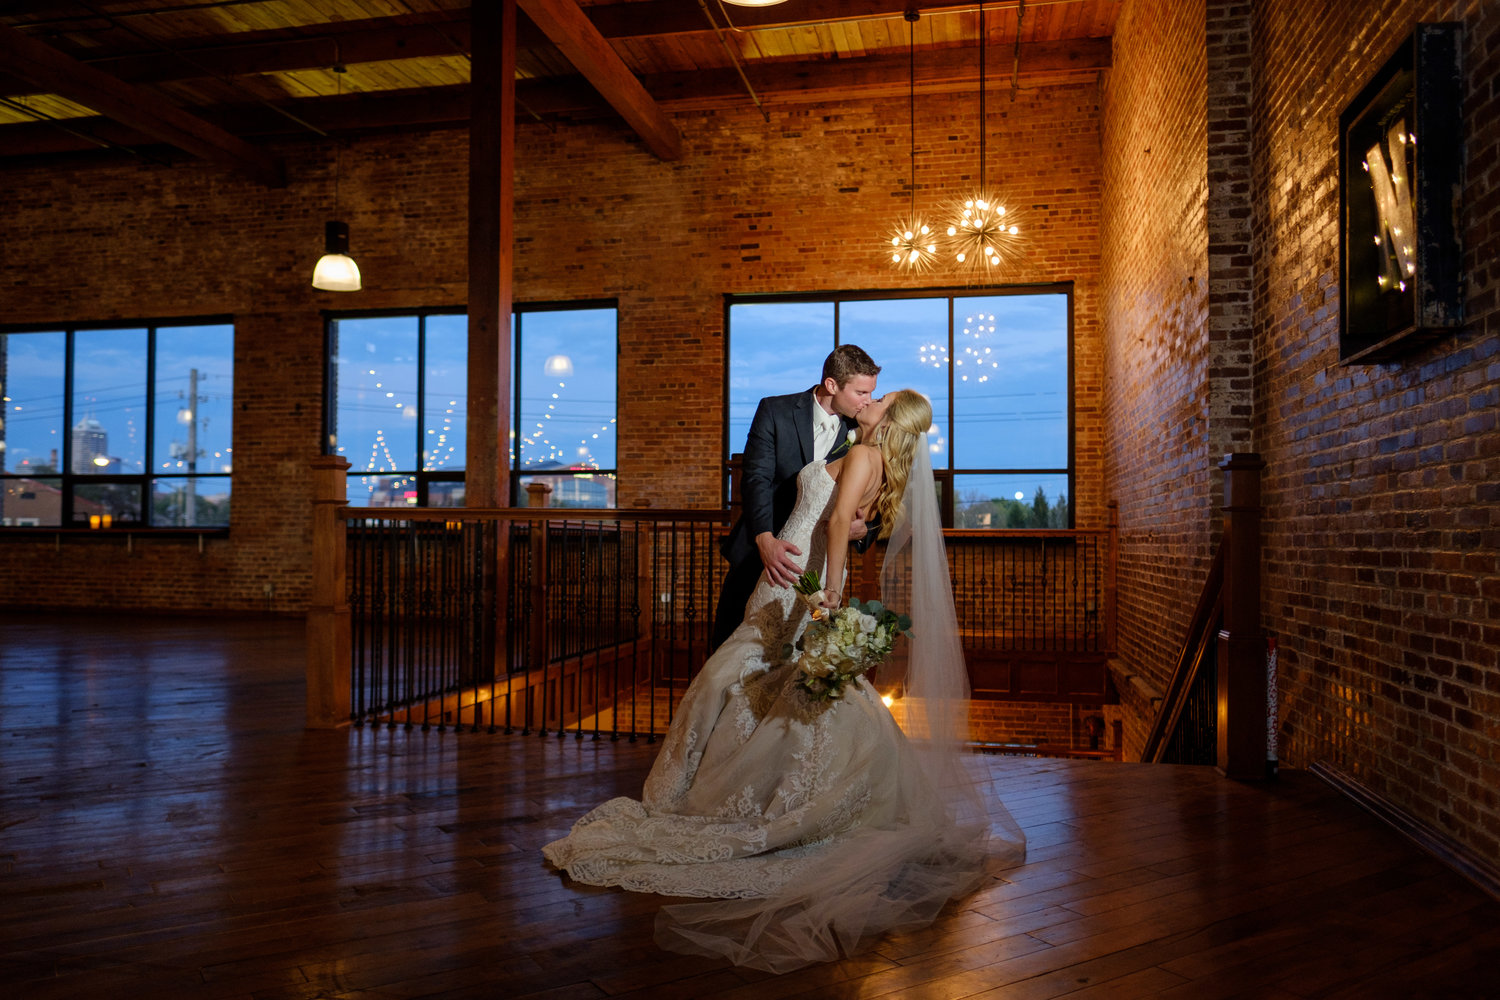 Laurel Hall — Recent Weddings and shoots by Nate Crouch, Indianapolis  Wedding Photographer — Nate Crouch Photography